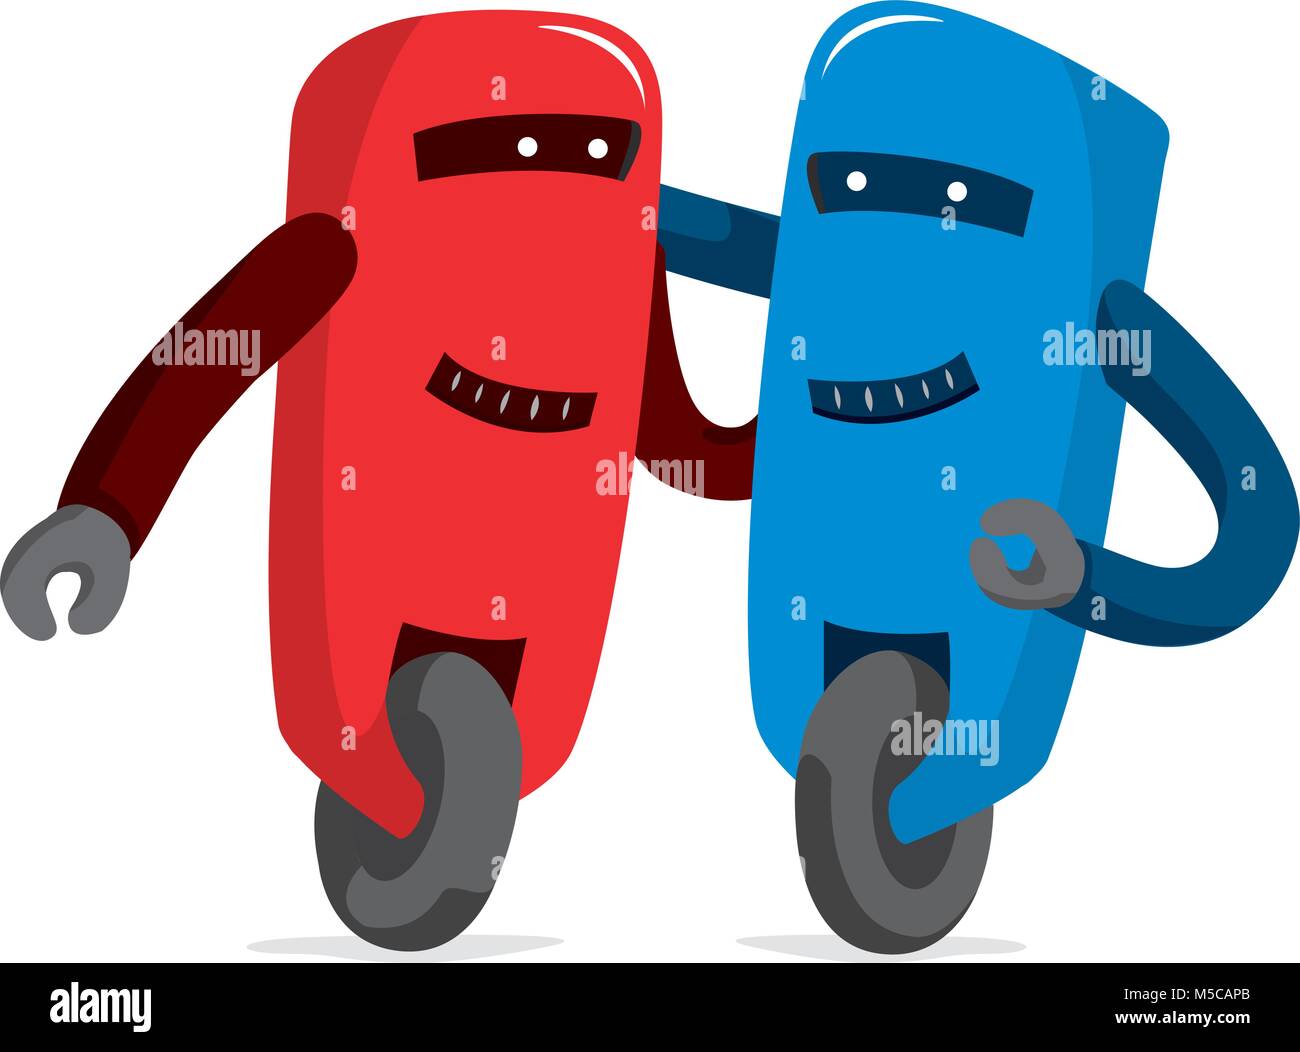 Cartoon illustration of red and blue robot sharing Stock Vector